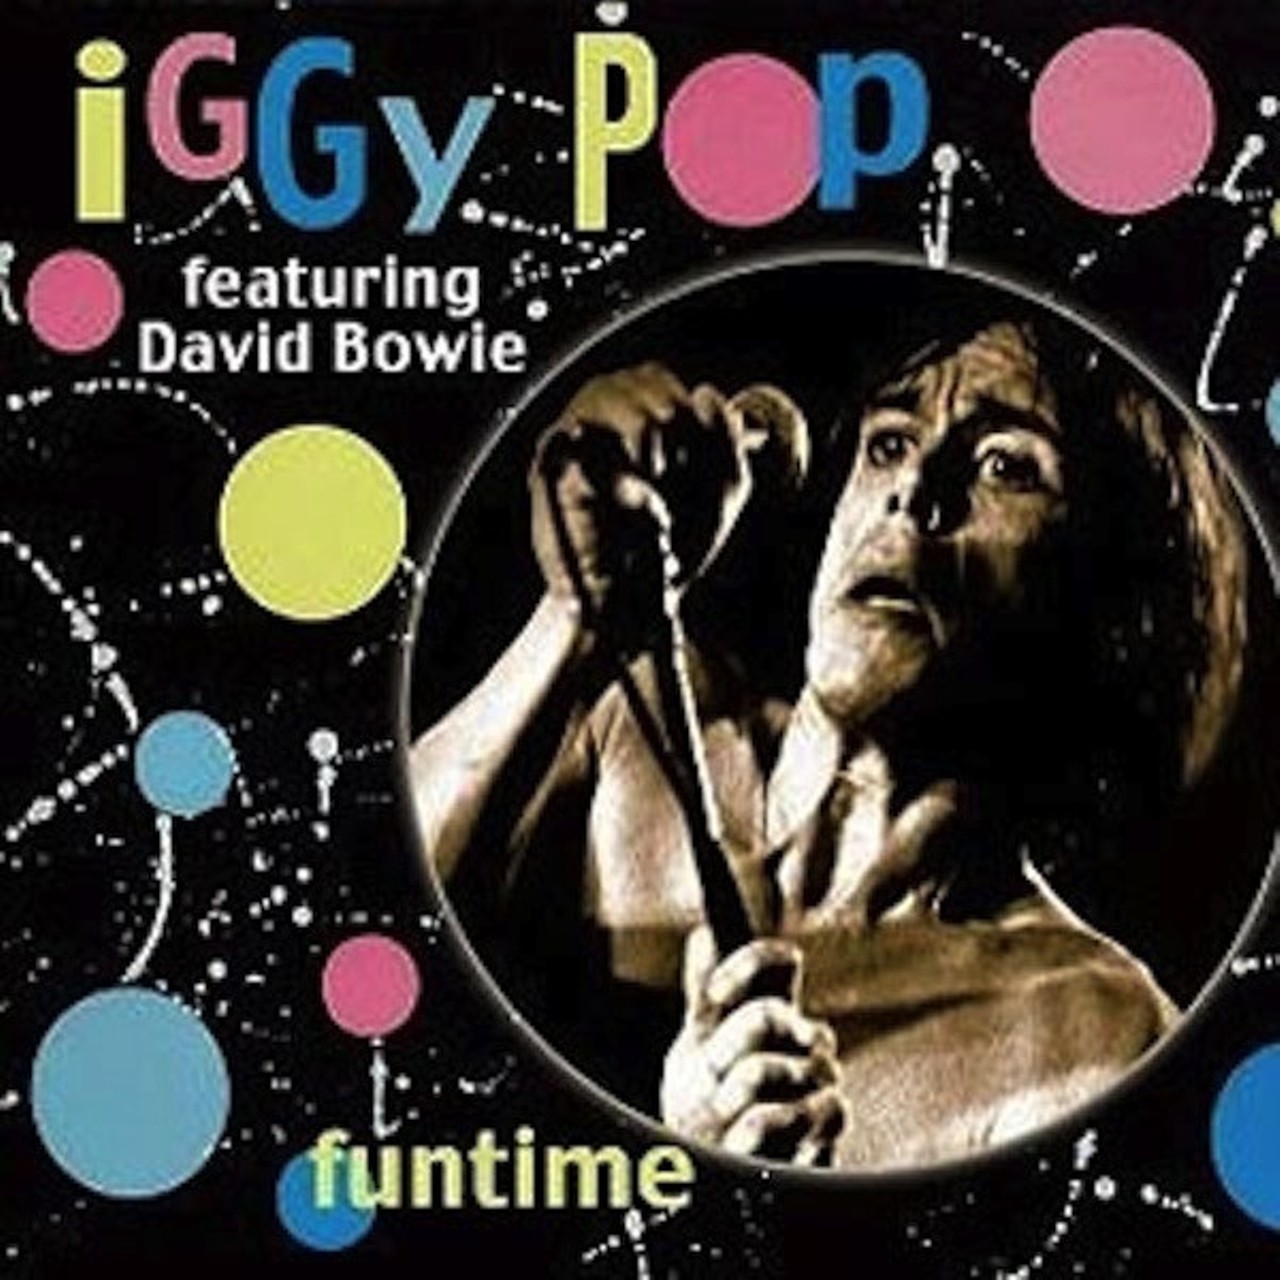 9. &#147;Funtime&#148;
Oh pretty please play this ridiculous song, which absolutely lives up to its name.
(Photo: original cover art to the single for &#147;Funtime.&#148;)